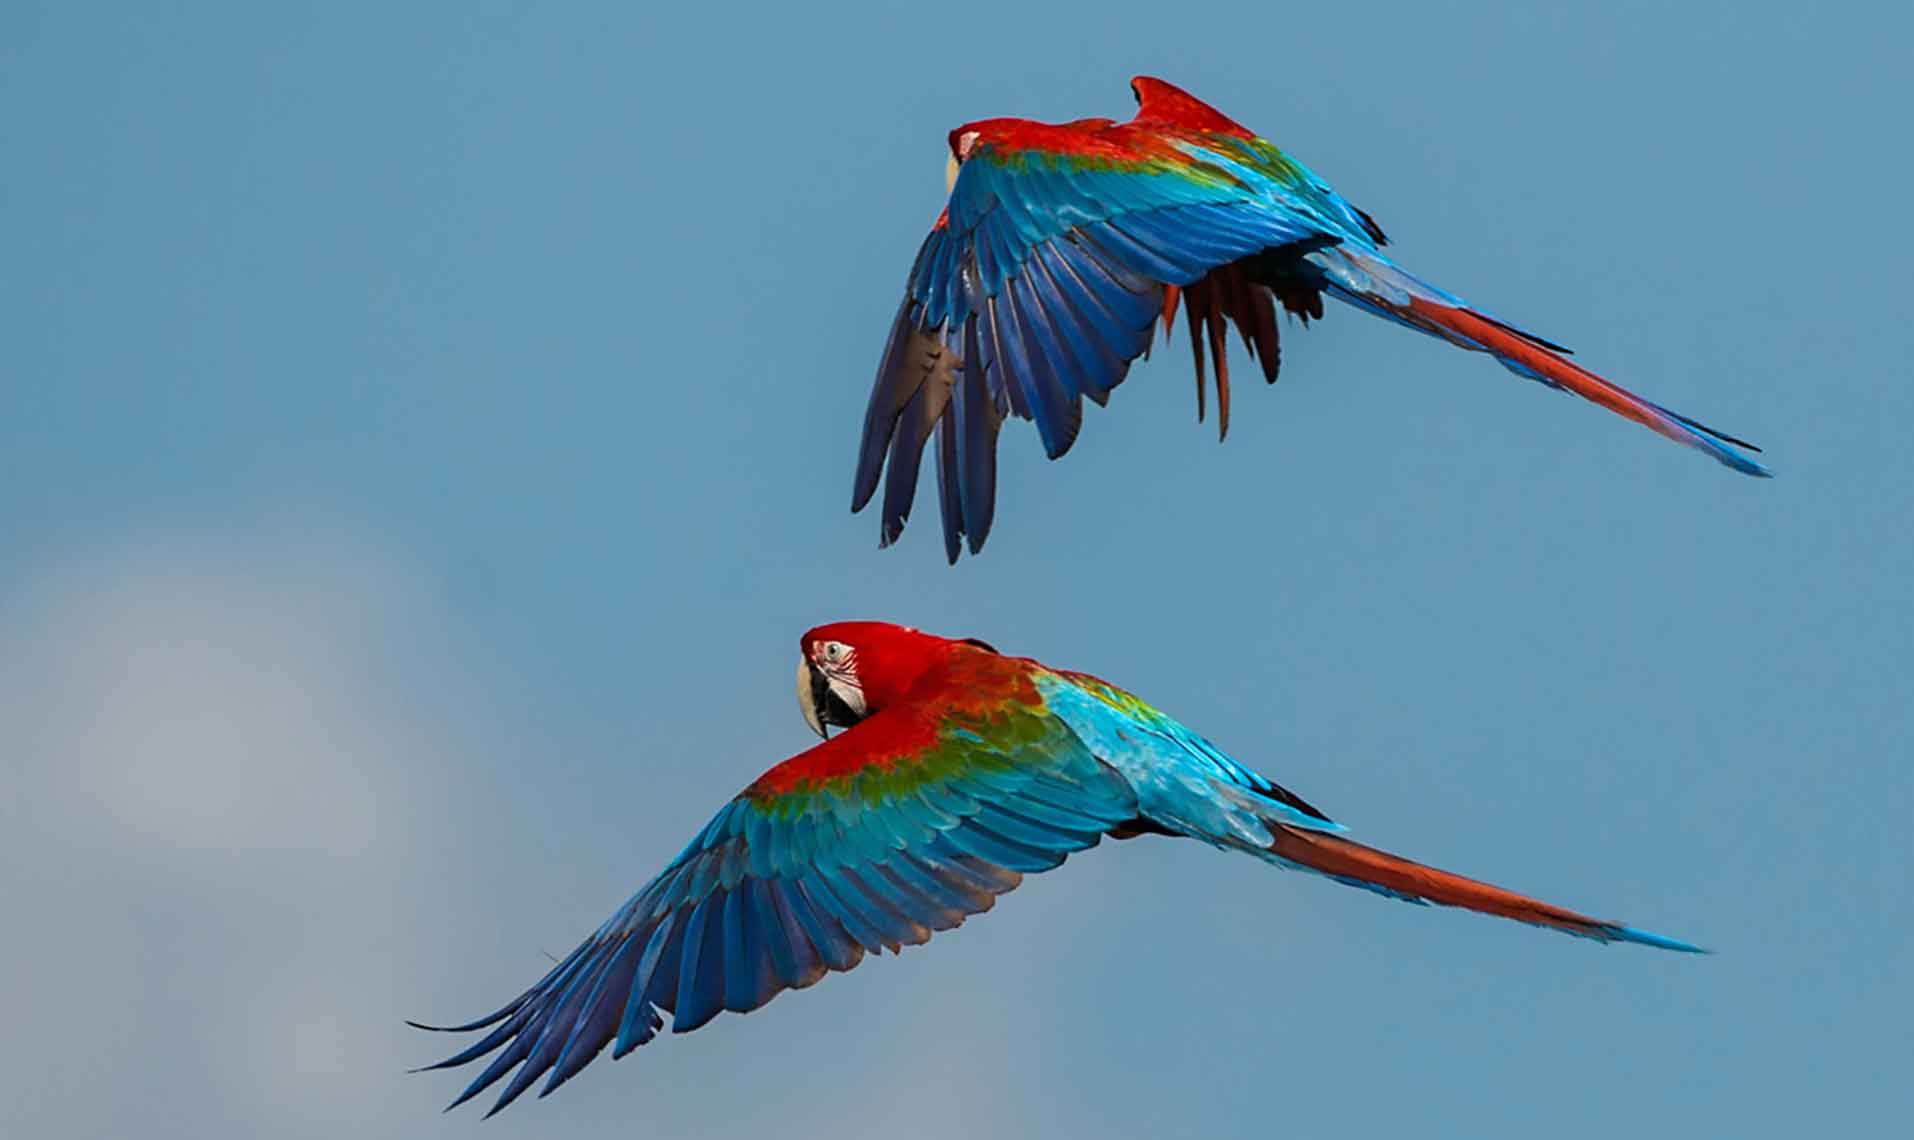 Rewilding – The Return of the Macaw